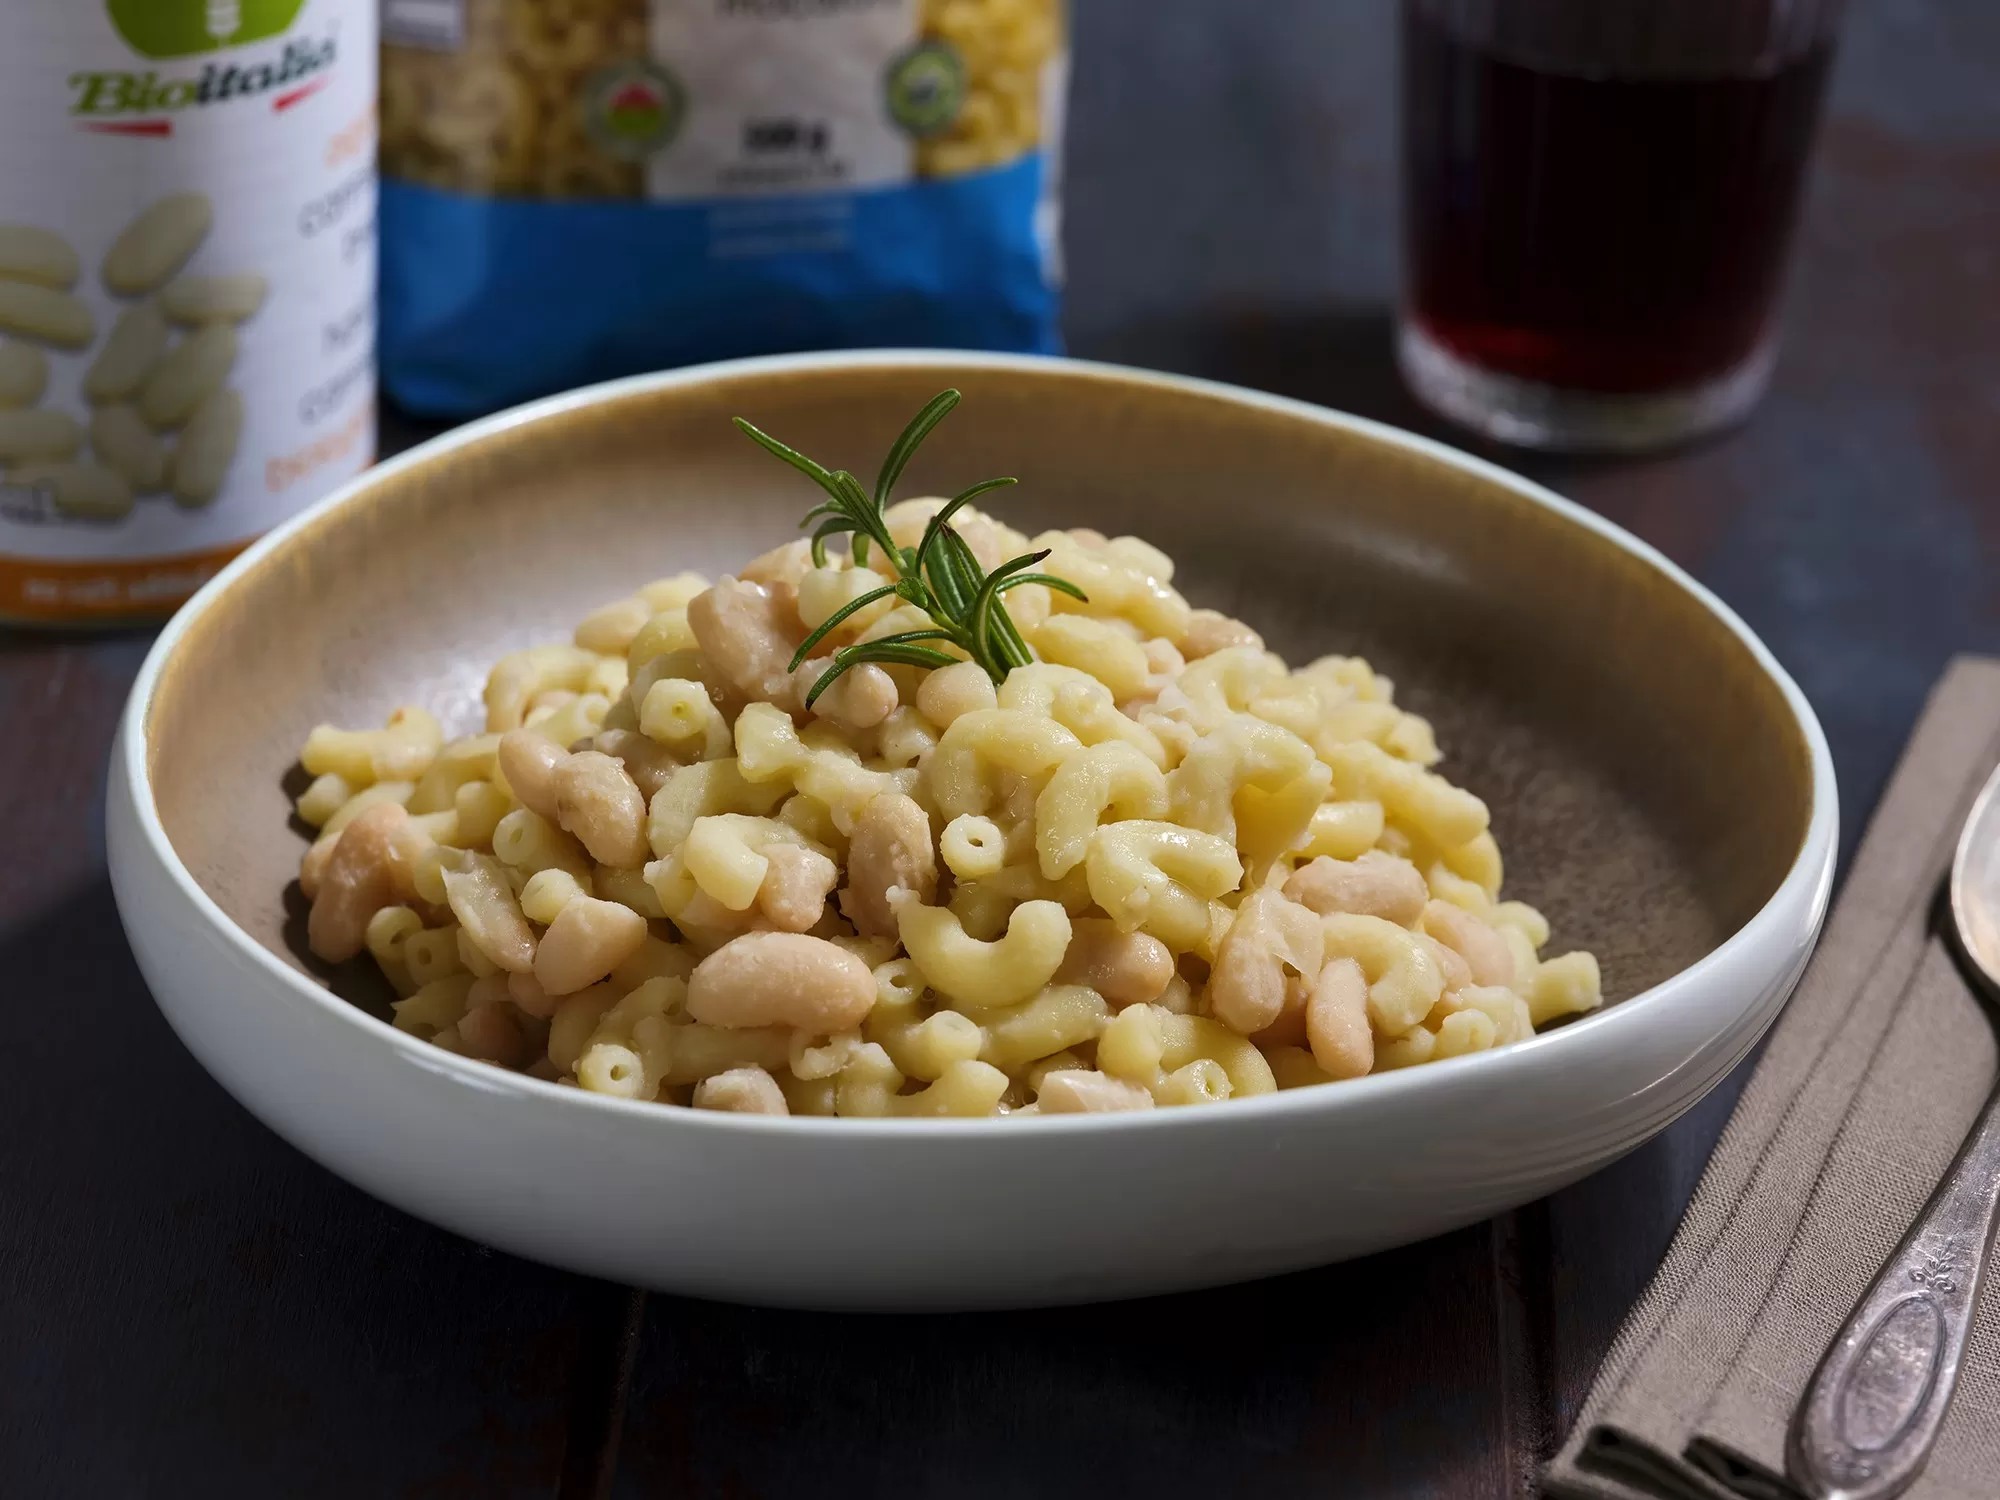 Macaroni pasta with cannellini beans